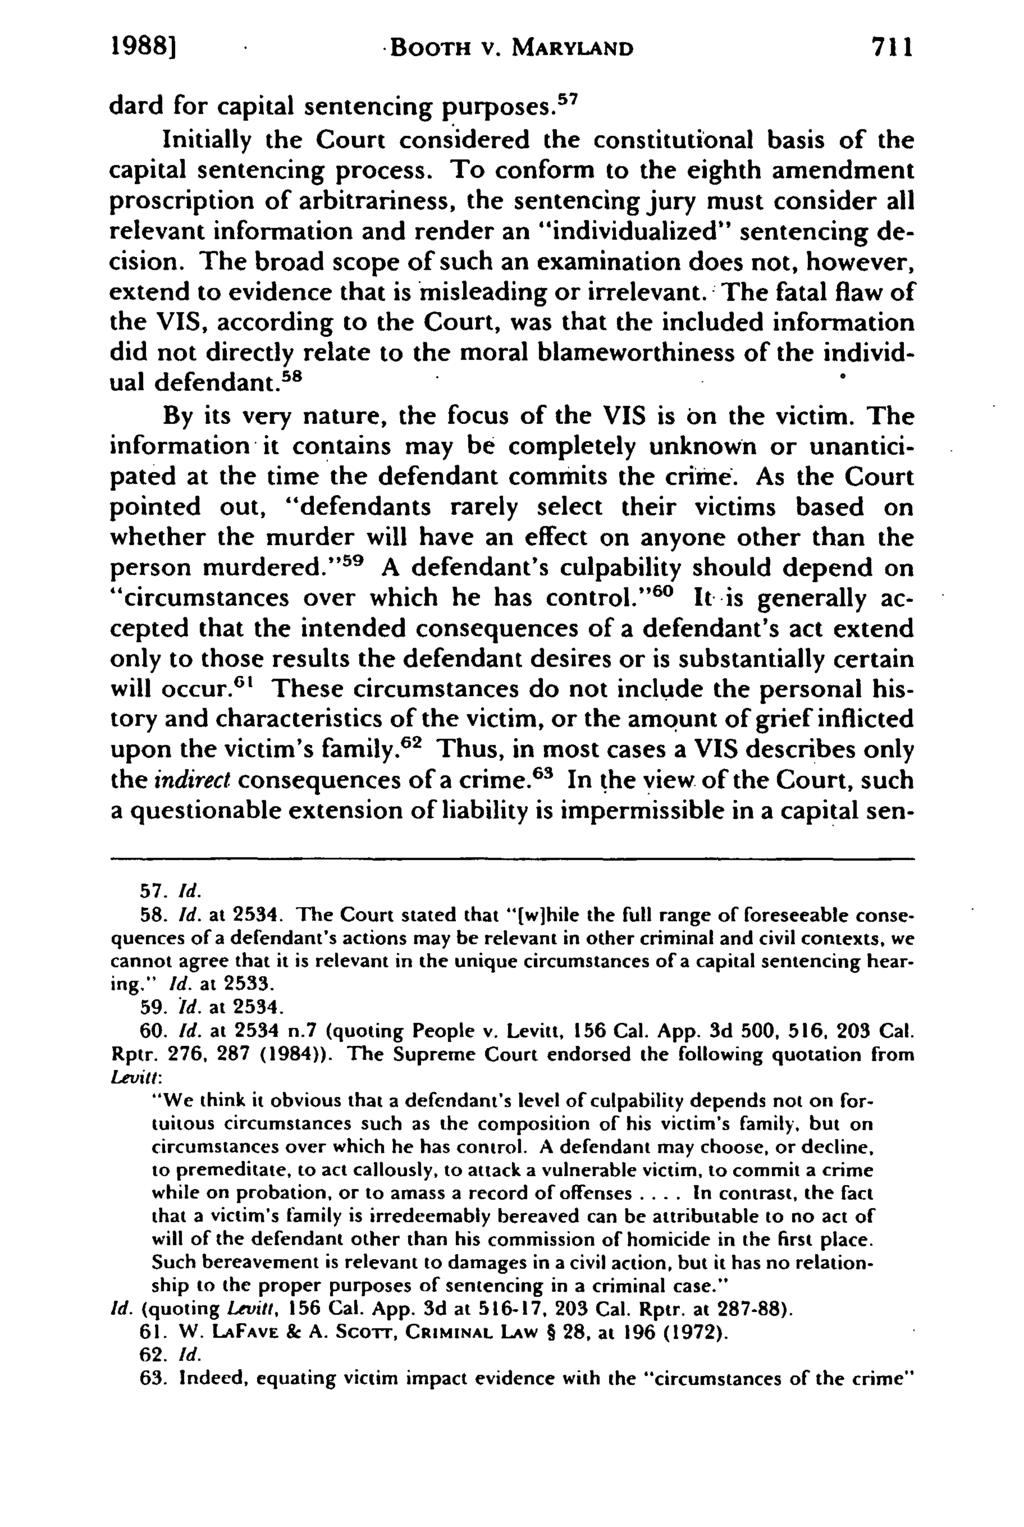 1988] -BOOTH V. MARYLAND 711 dard for capital sentencing purposes. 5 7 Initially the Court considered the constitutional basis of the capital sentencing process.